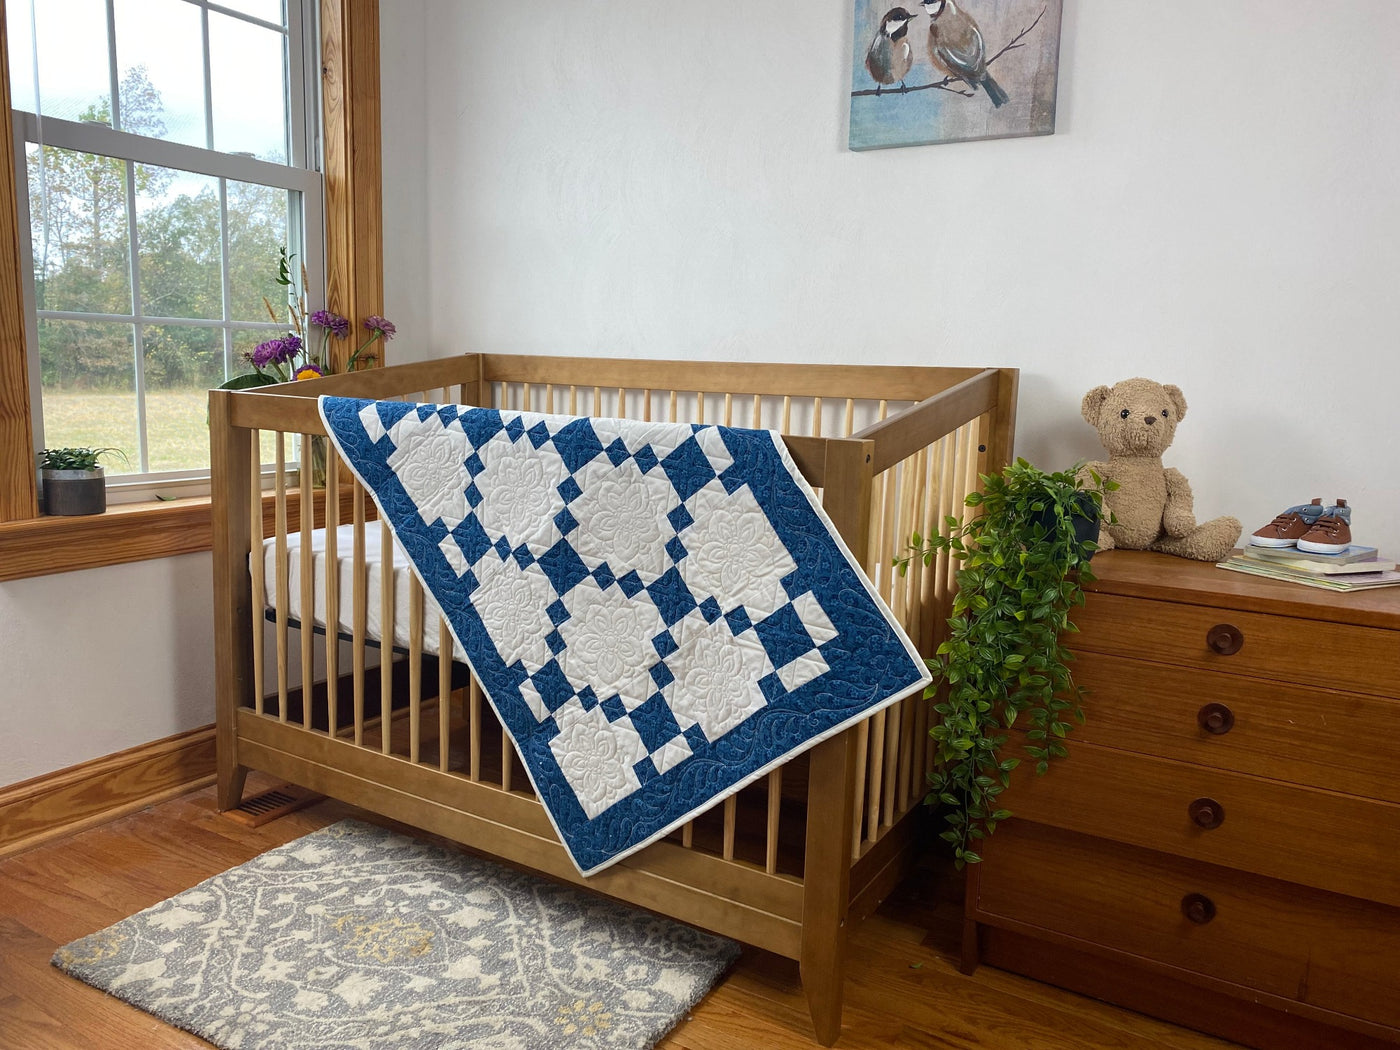  A handmade, heirloom, patchwork of indigo/blue nine patch with white background fabric, natural color backing, 100% cotton batting, Floral top quilting in the white centers, X's in the 9 patch squares, and feathers along the borders, machine top stitched binding, on this size quilt